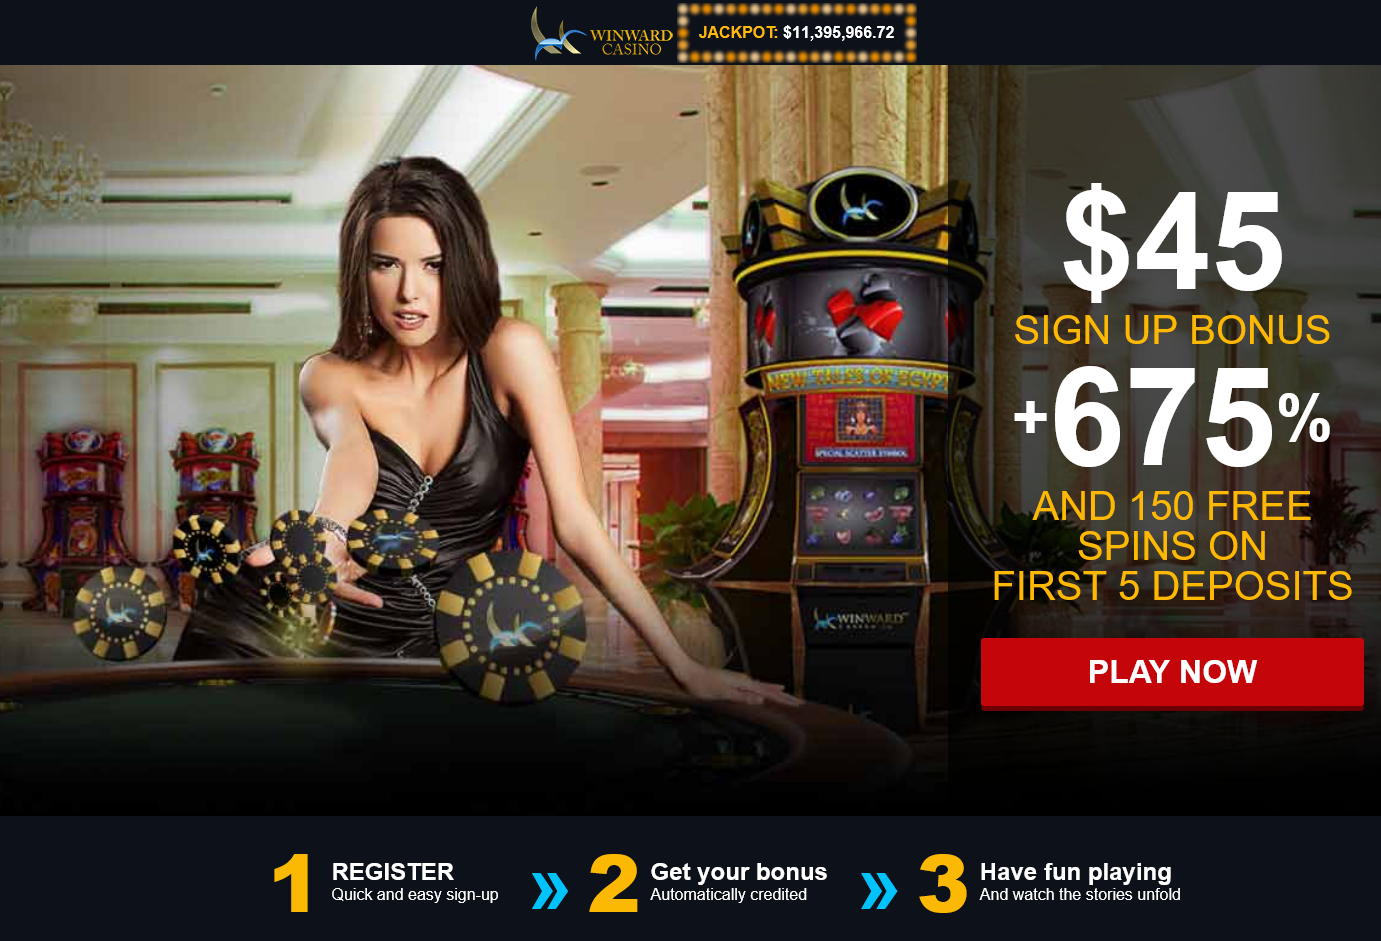 $45 SIGN
                                                          UP BONUS + 675
                                                          % AND 150 FREE
                                                          SPINS ON FIRST
                                                          5 DEPOSITS